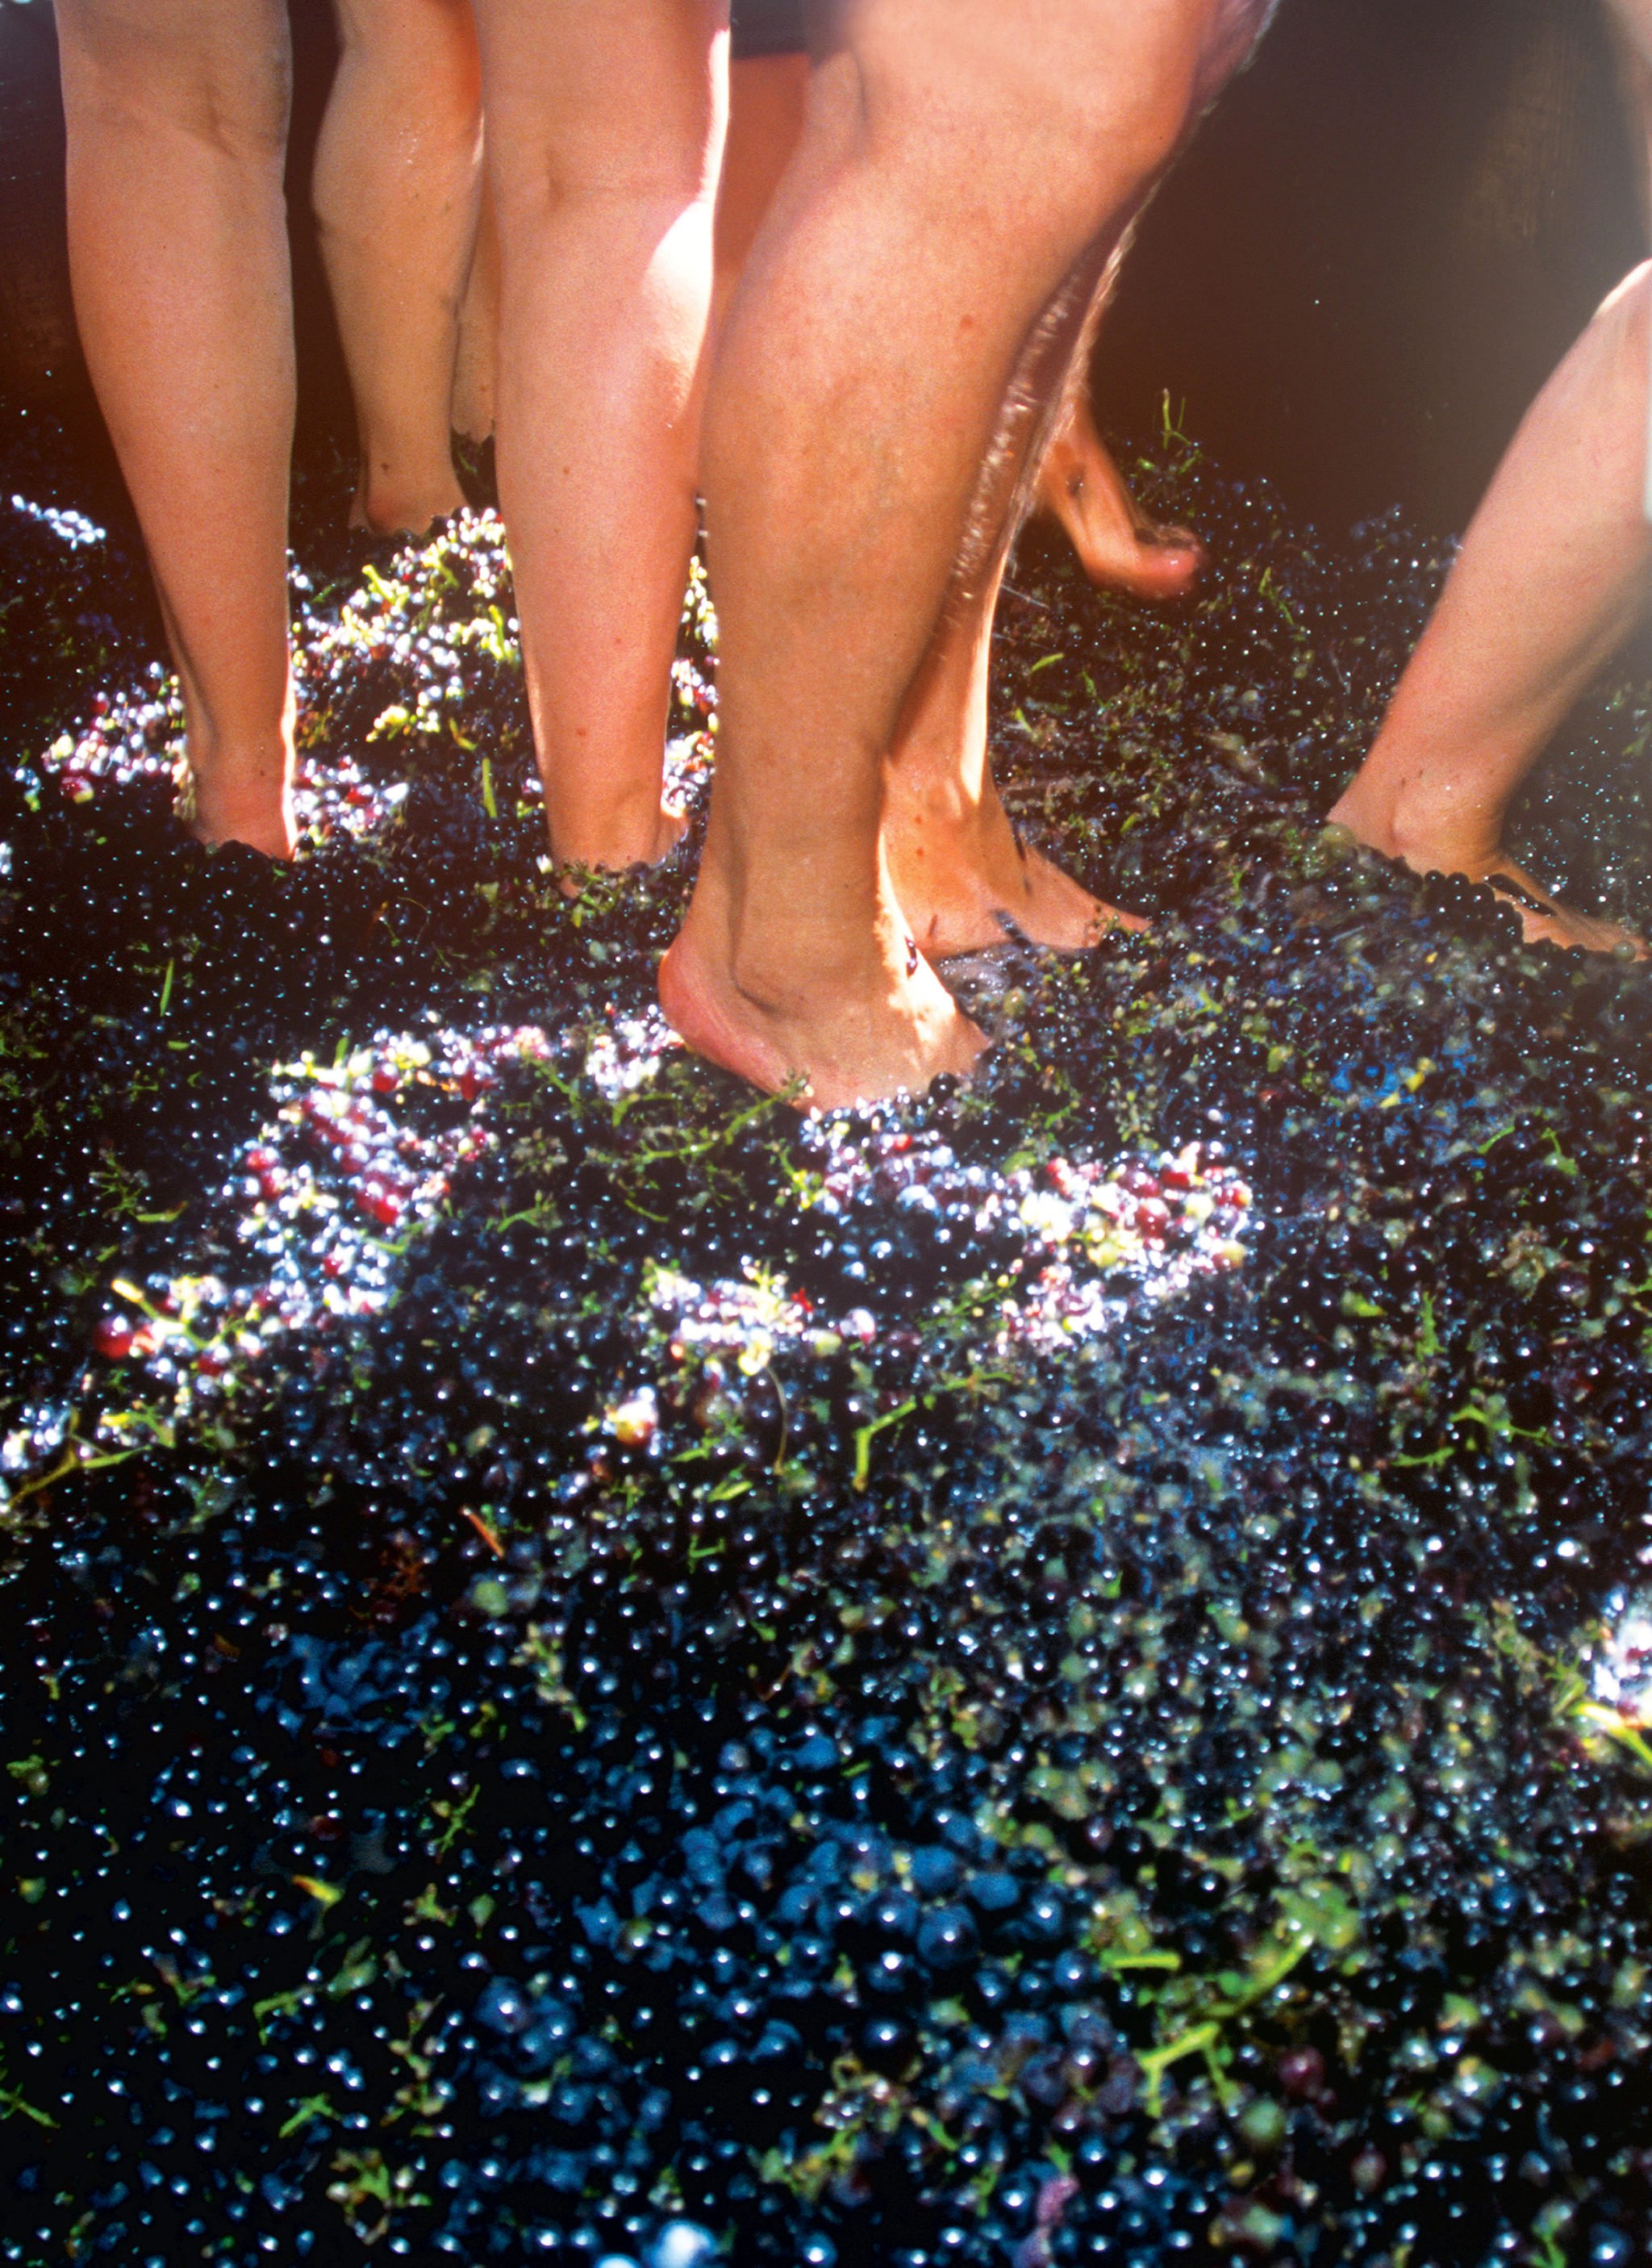 Stomping grounds: Fall wine fests. Photograph Courtesy of Prisma by Dukas Presseagentur/Alamy.